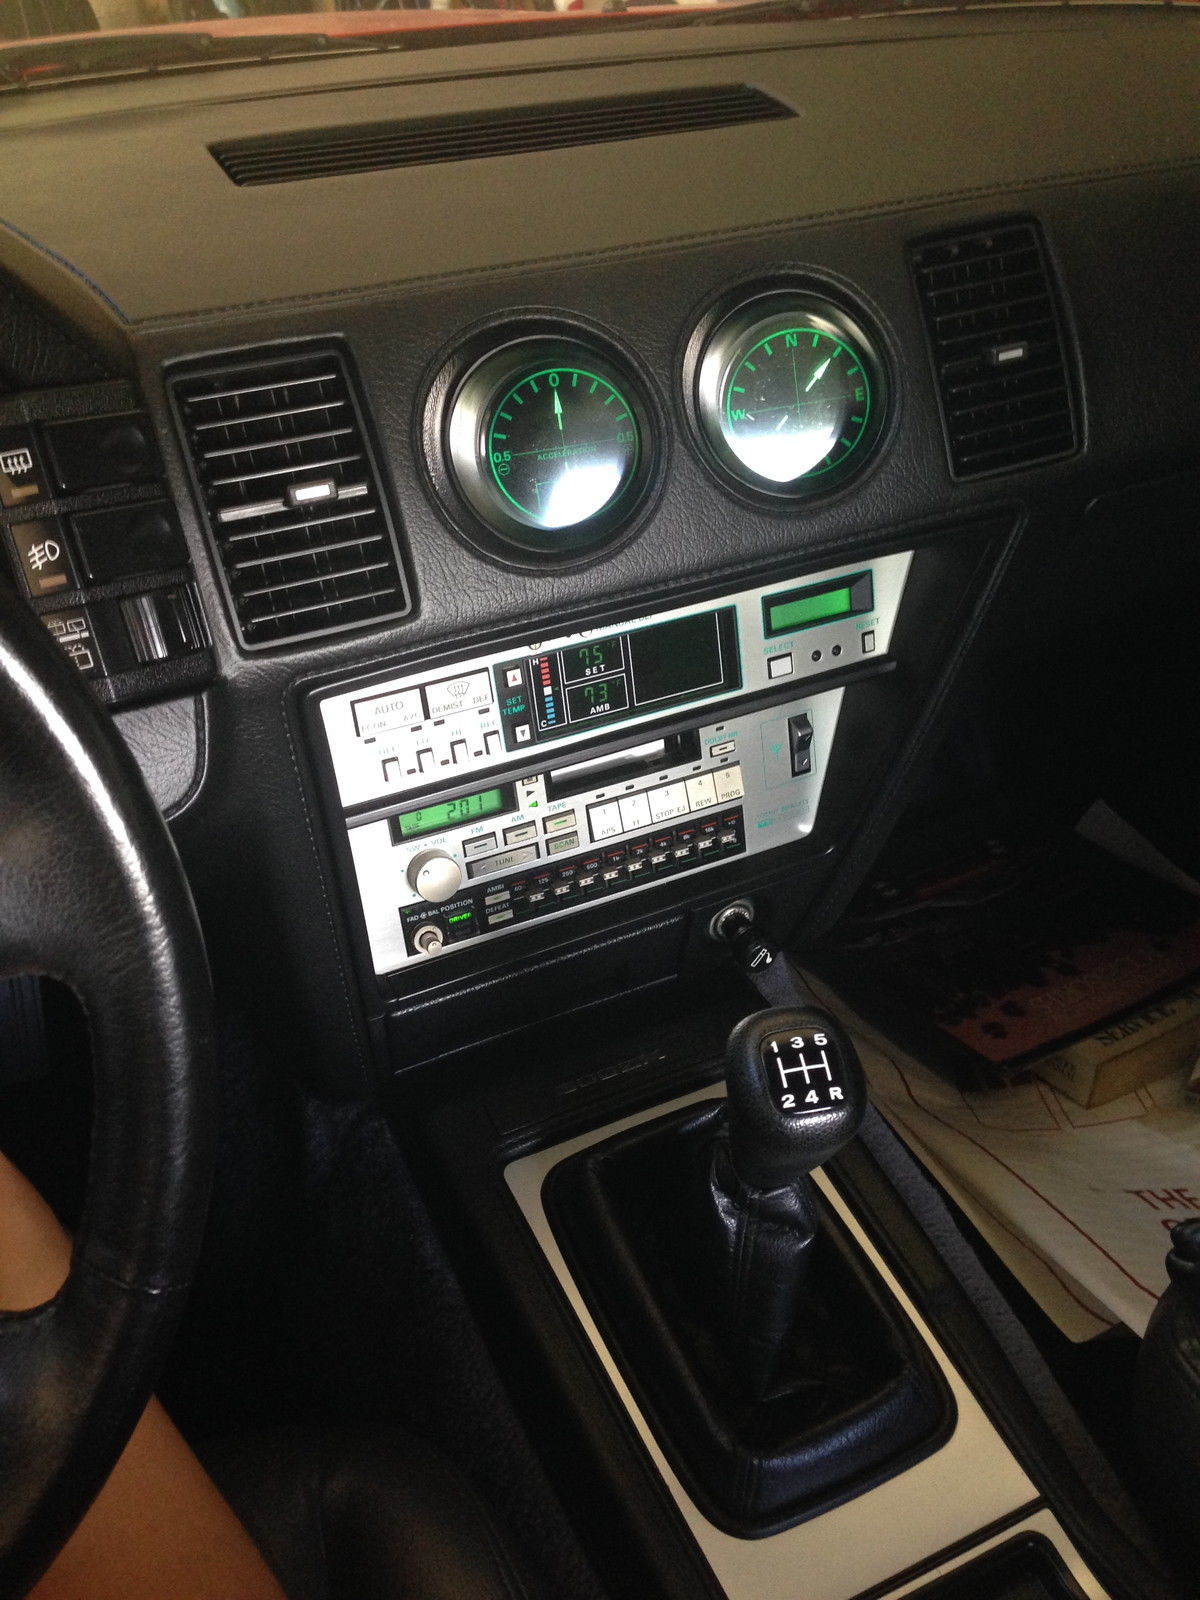 1986 Nissan 300ZX Z31 with 15k Miles Looks As Good As New | Carscoops1200 x 1600